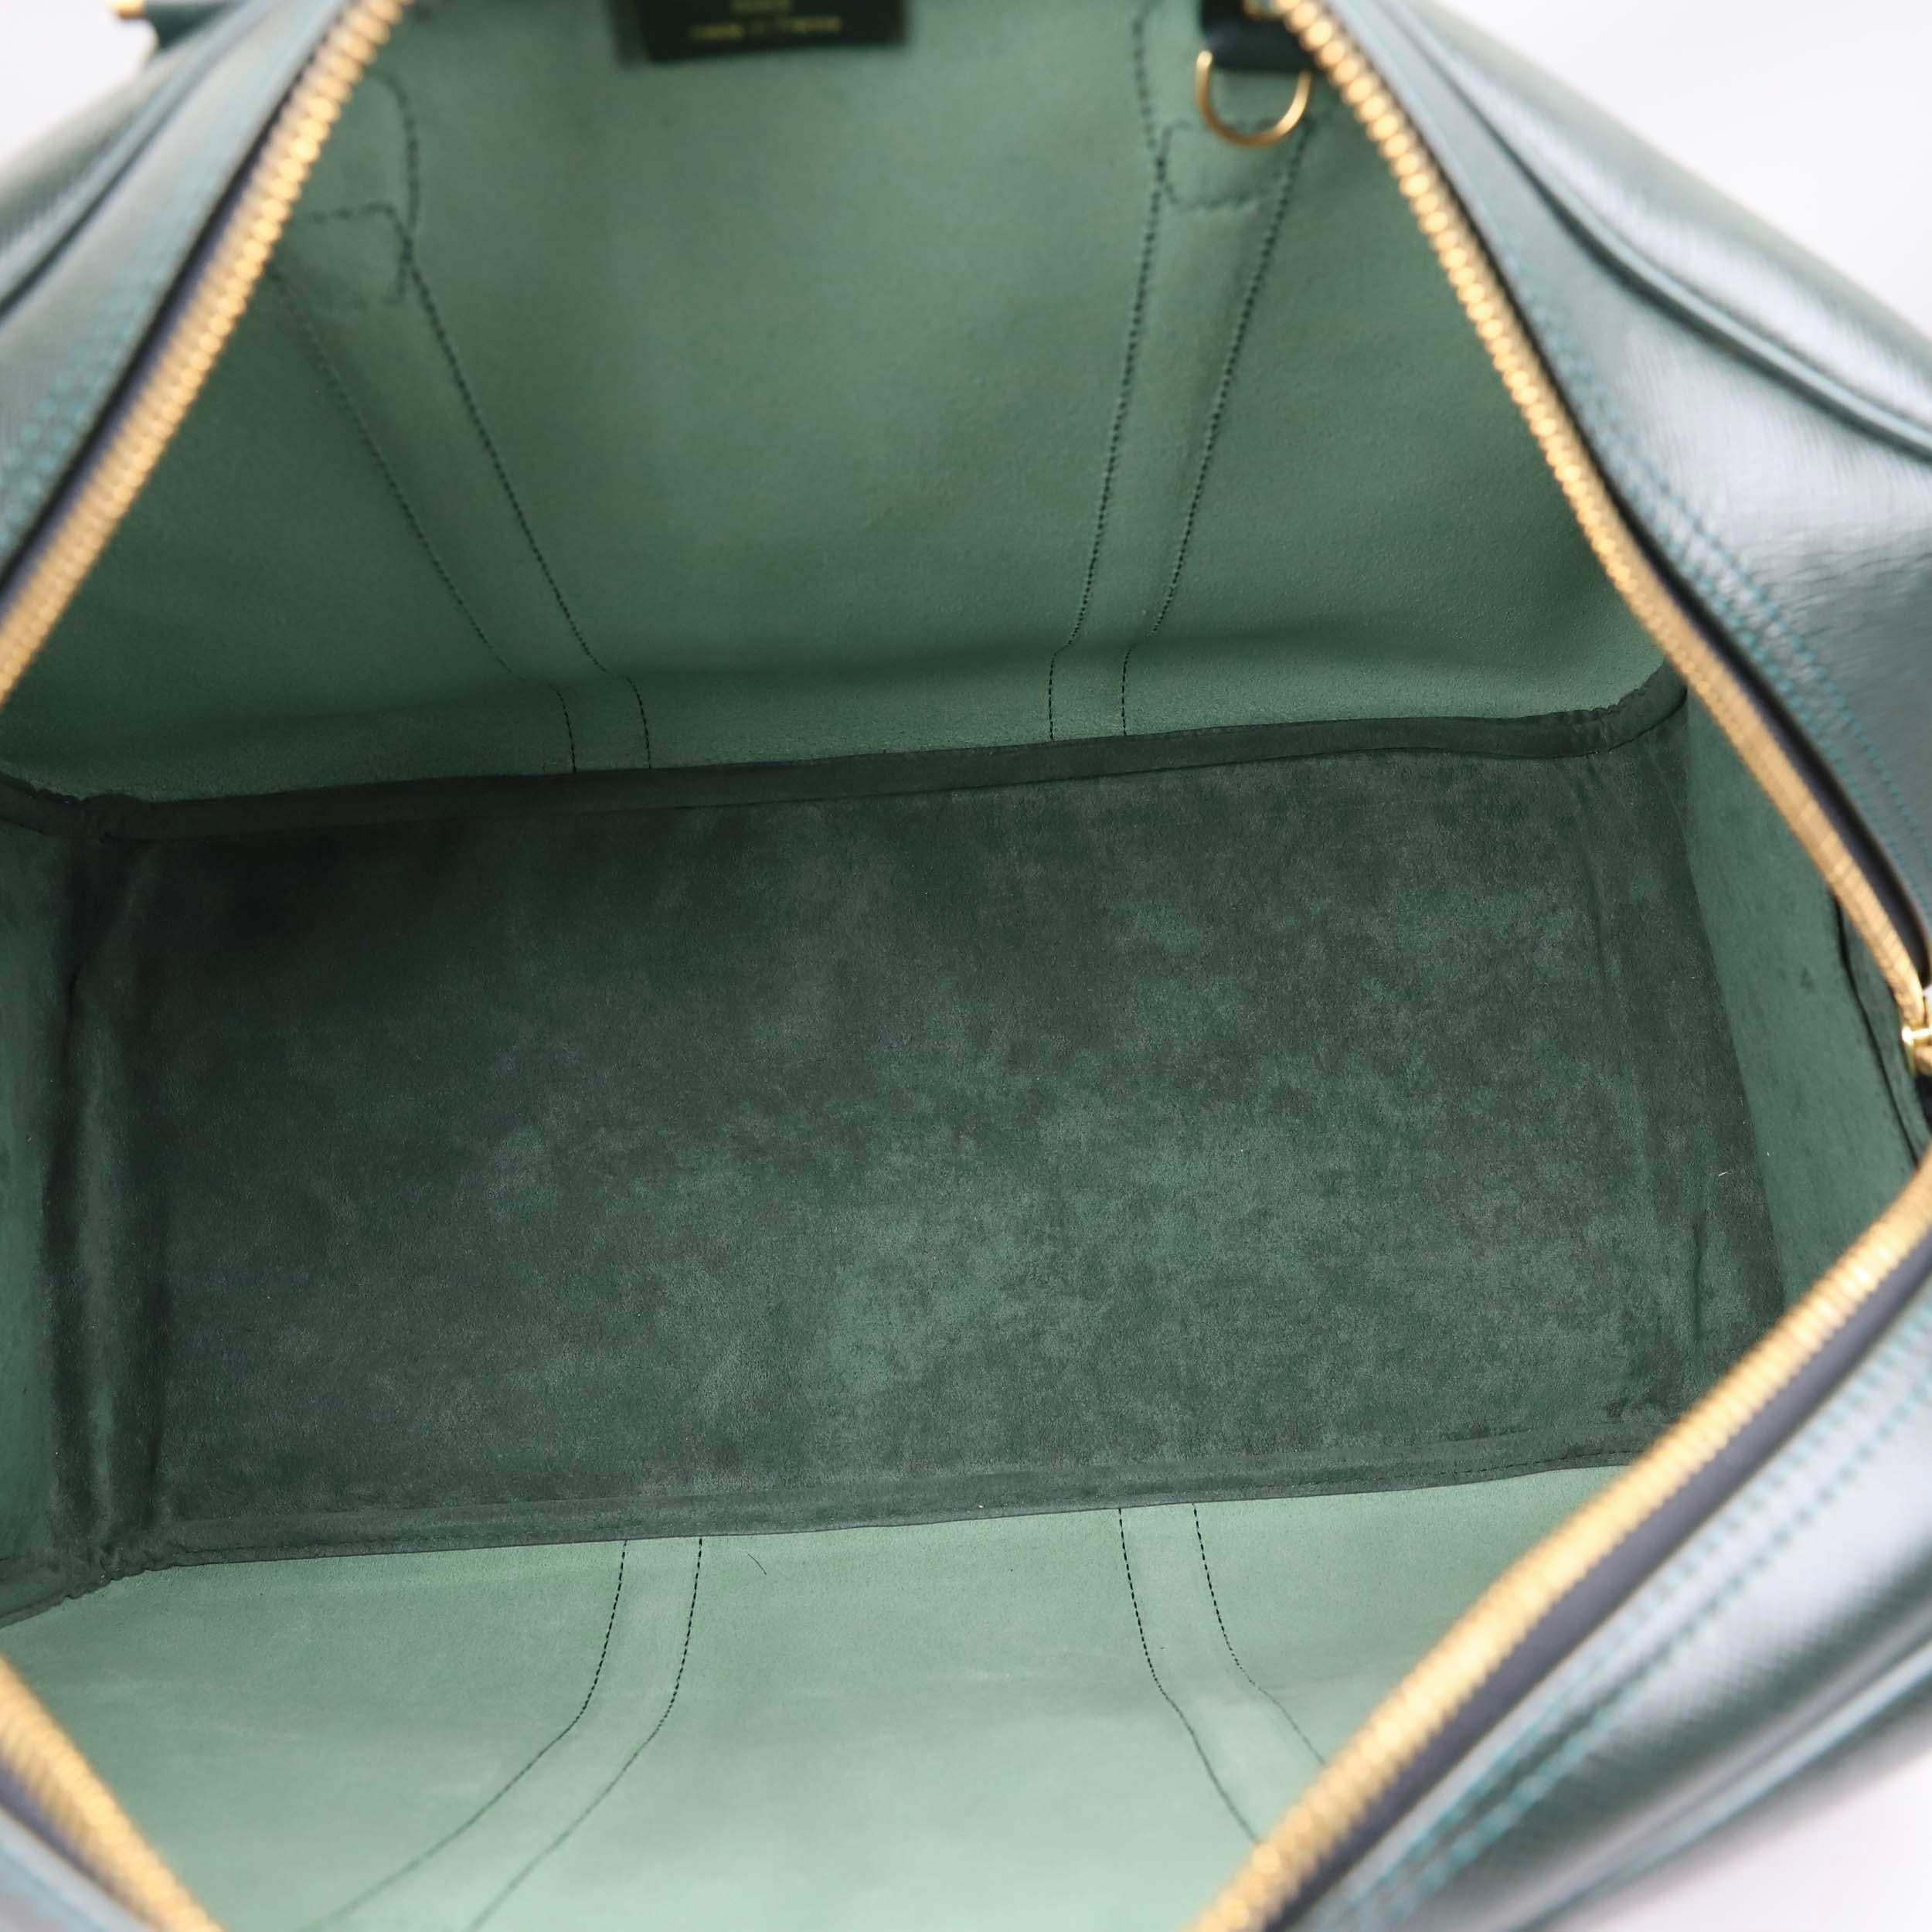 Travel in style with this Louis Vuitton Epicea Green Taiga bag in classic Kendall Keepall leather. This lovely travel bag is perfect for anyone who wants to carry their precious travel essentials in sleek style. It features beautiful taiga green